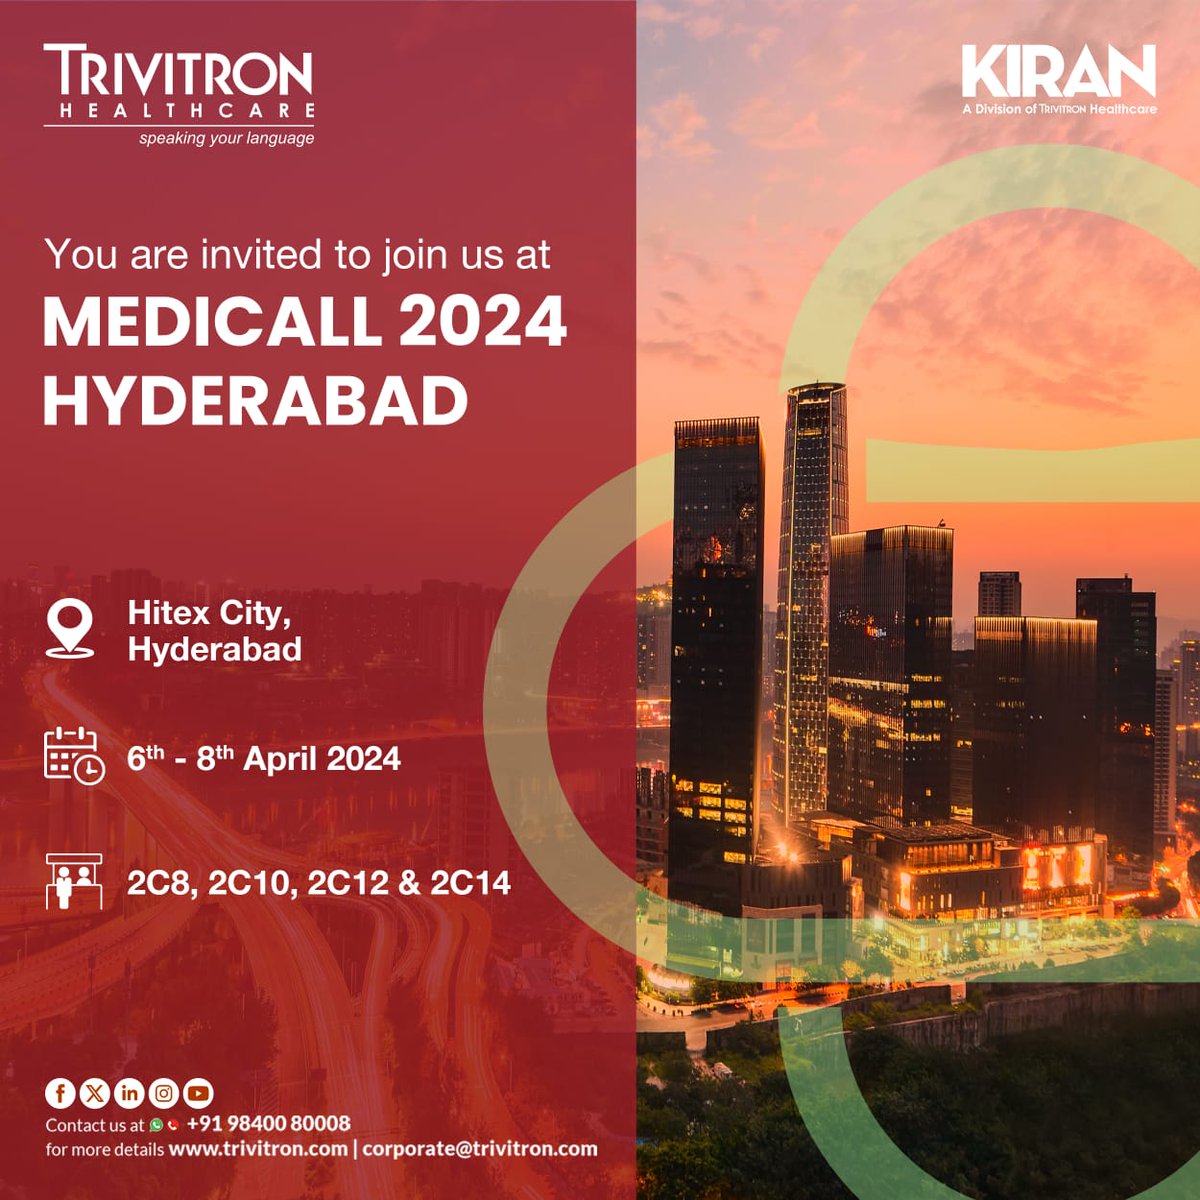 Trivitron Healthcare cordially invites you to Medicall 2024 in Hyderabad from April 6th to 8th. Visit us at booth 2C8, 2C10, 2C12 & 2C14 to explore our Critical Care, Medical Imaging and Radiology solutions. Don't miss this opportunity to witness our solutions that can…